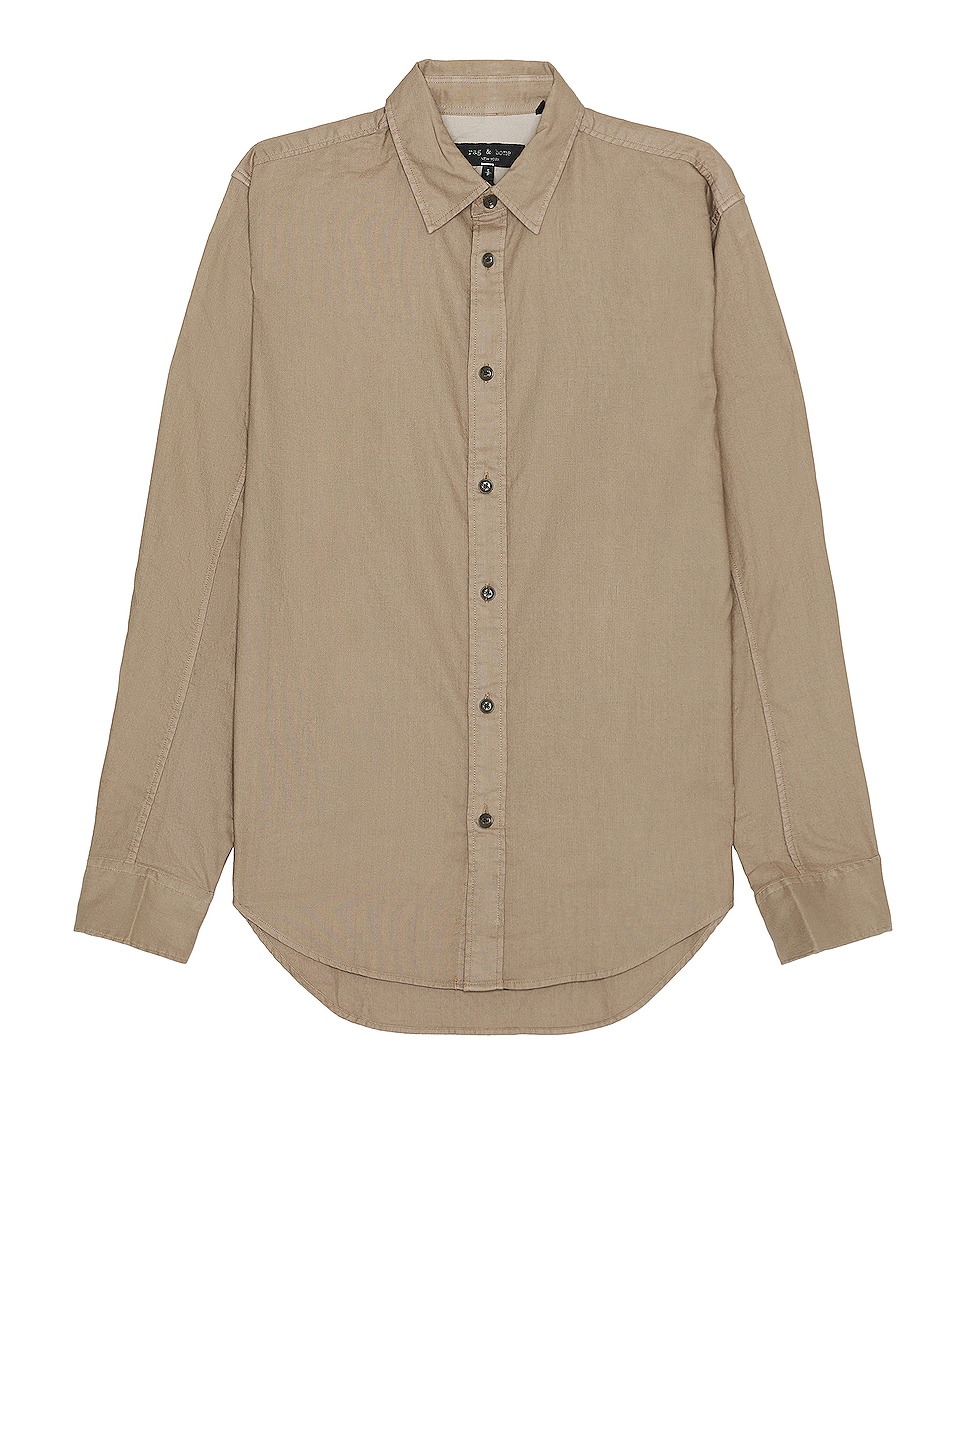 Image 1 of Rag & Bone Fit 2 Engineered Oxford Shirt in Taupe